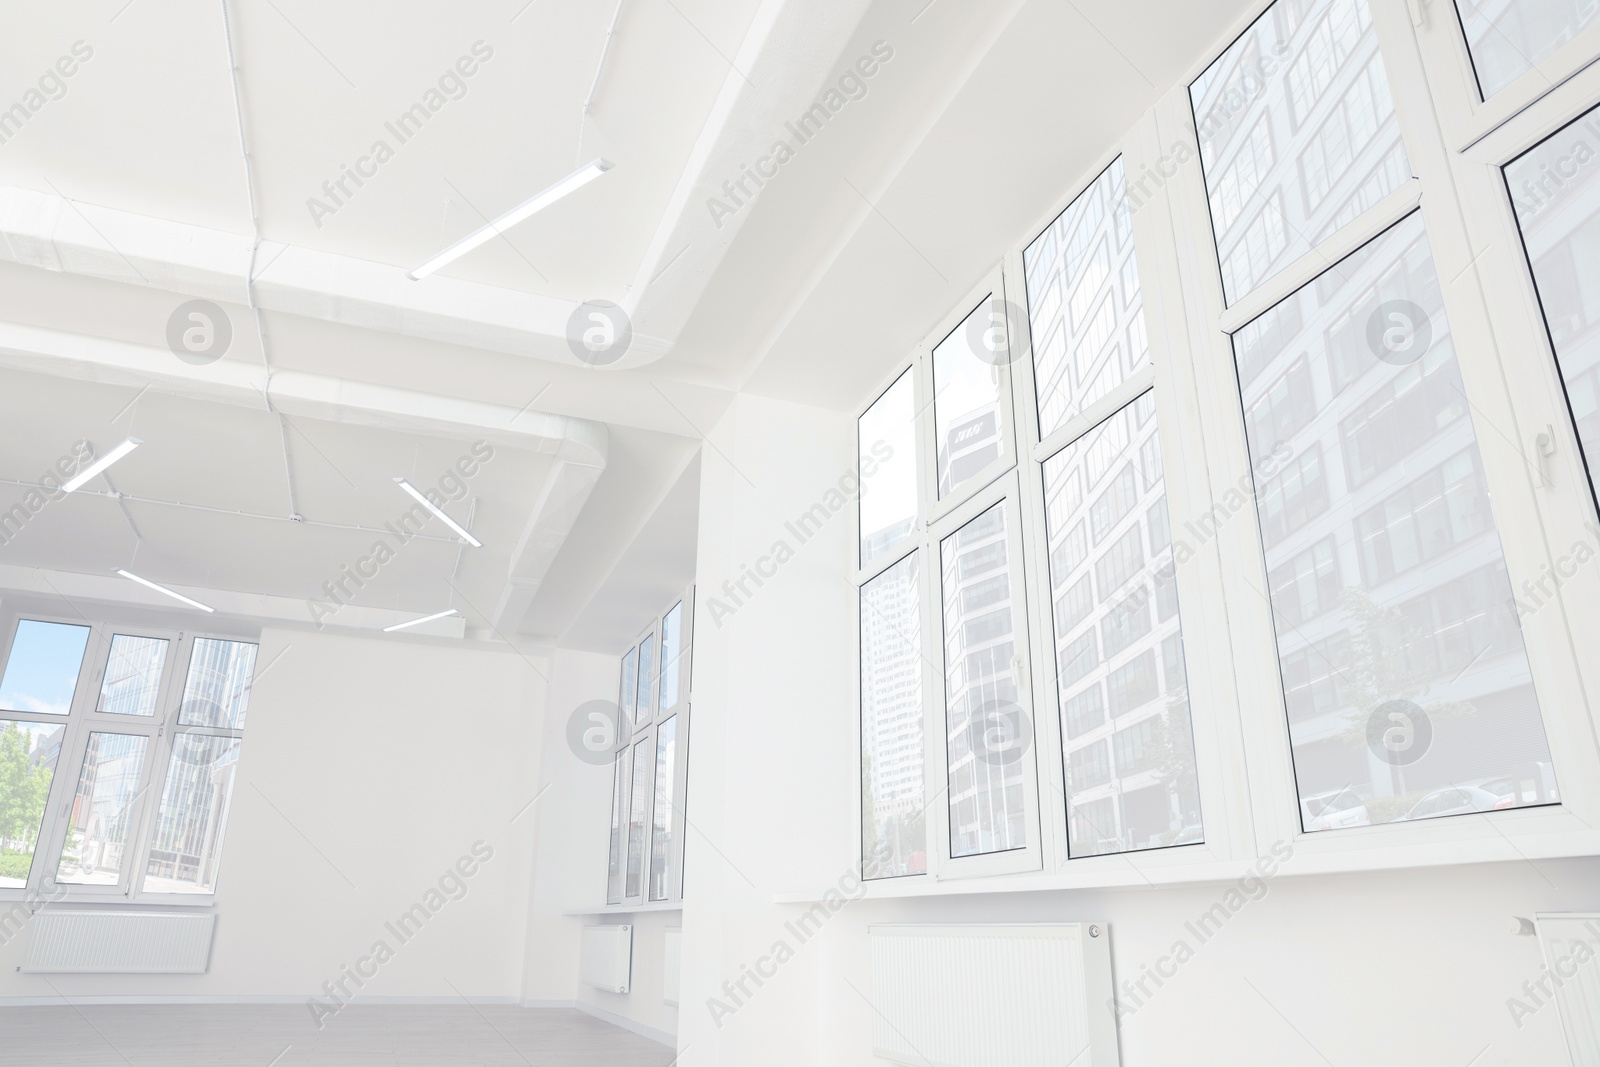 Photo of Empty office room with clean windows and lighting. Interior design